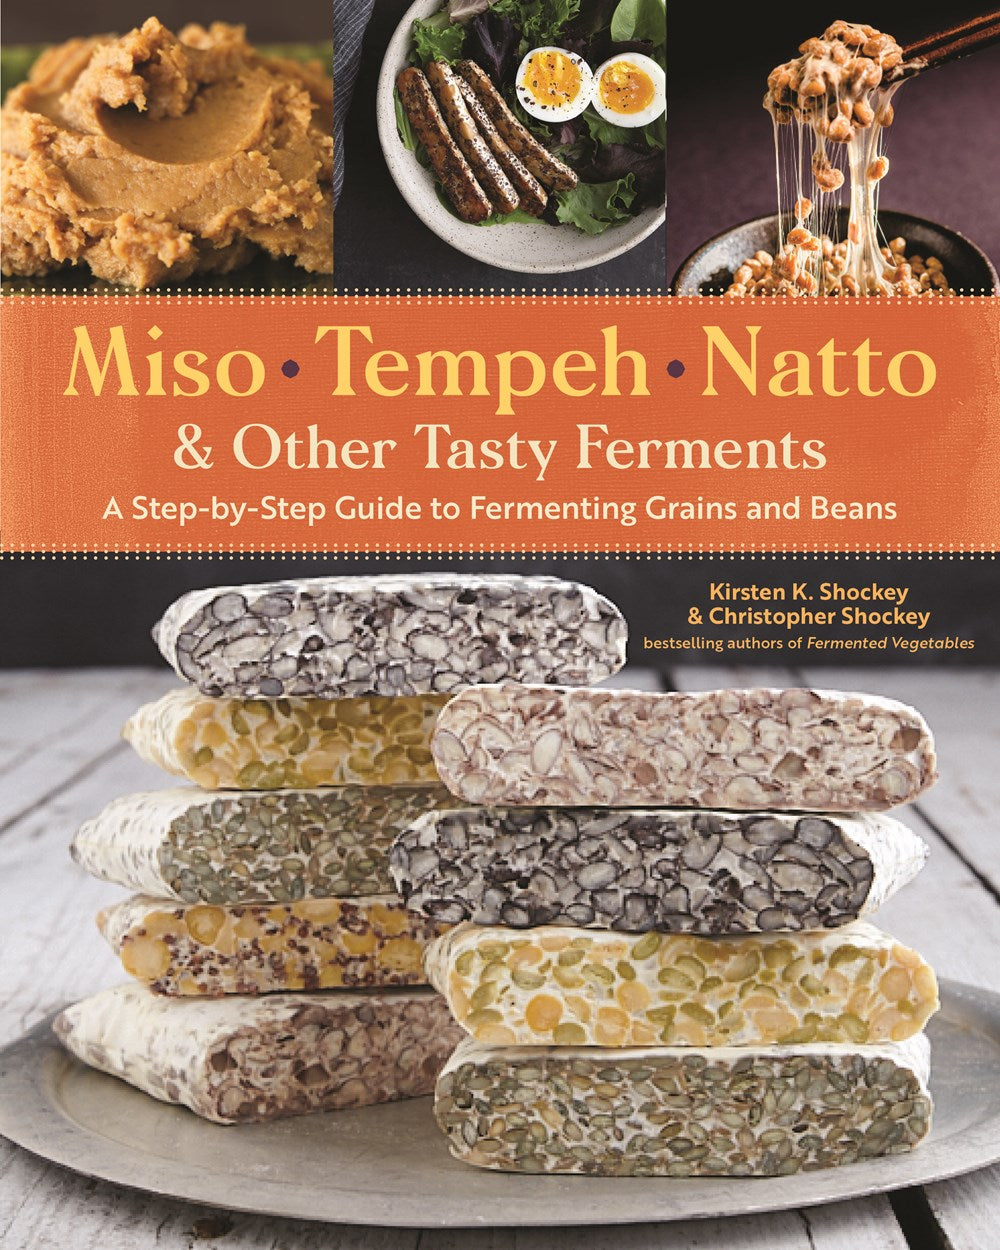 Miso, Tempeh, Natto and Other Tasty Ferments